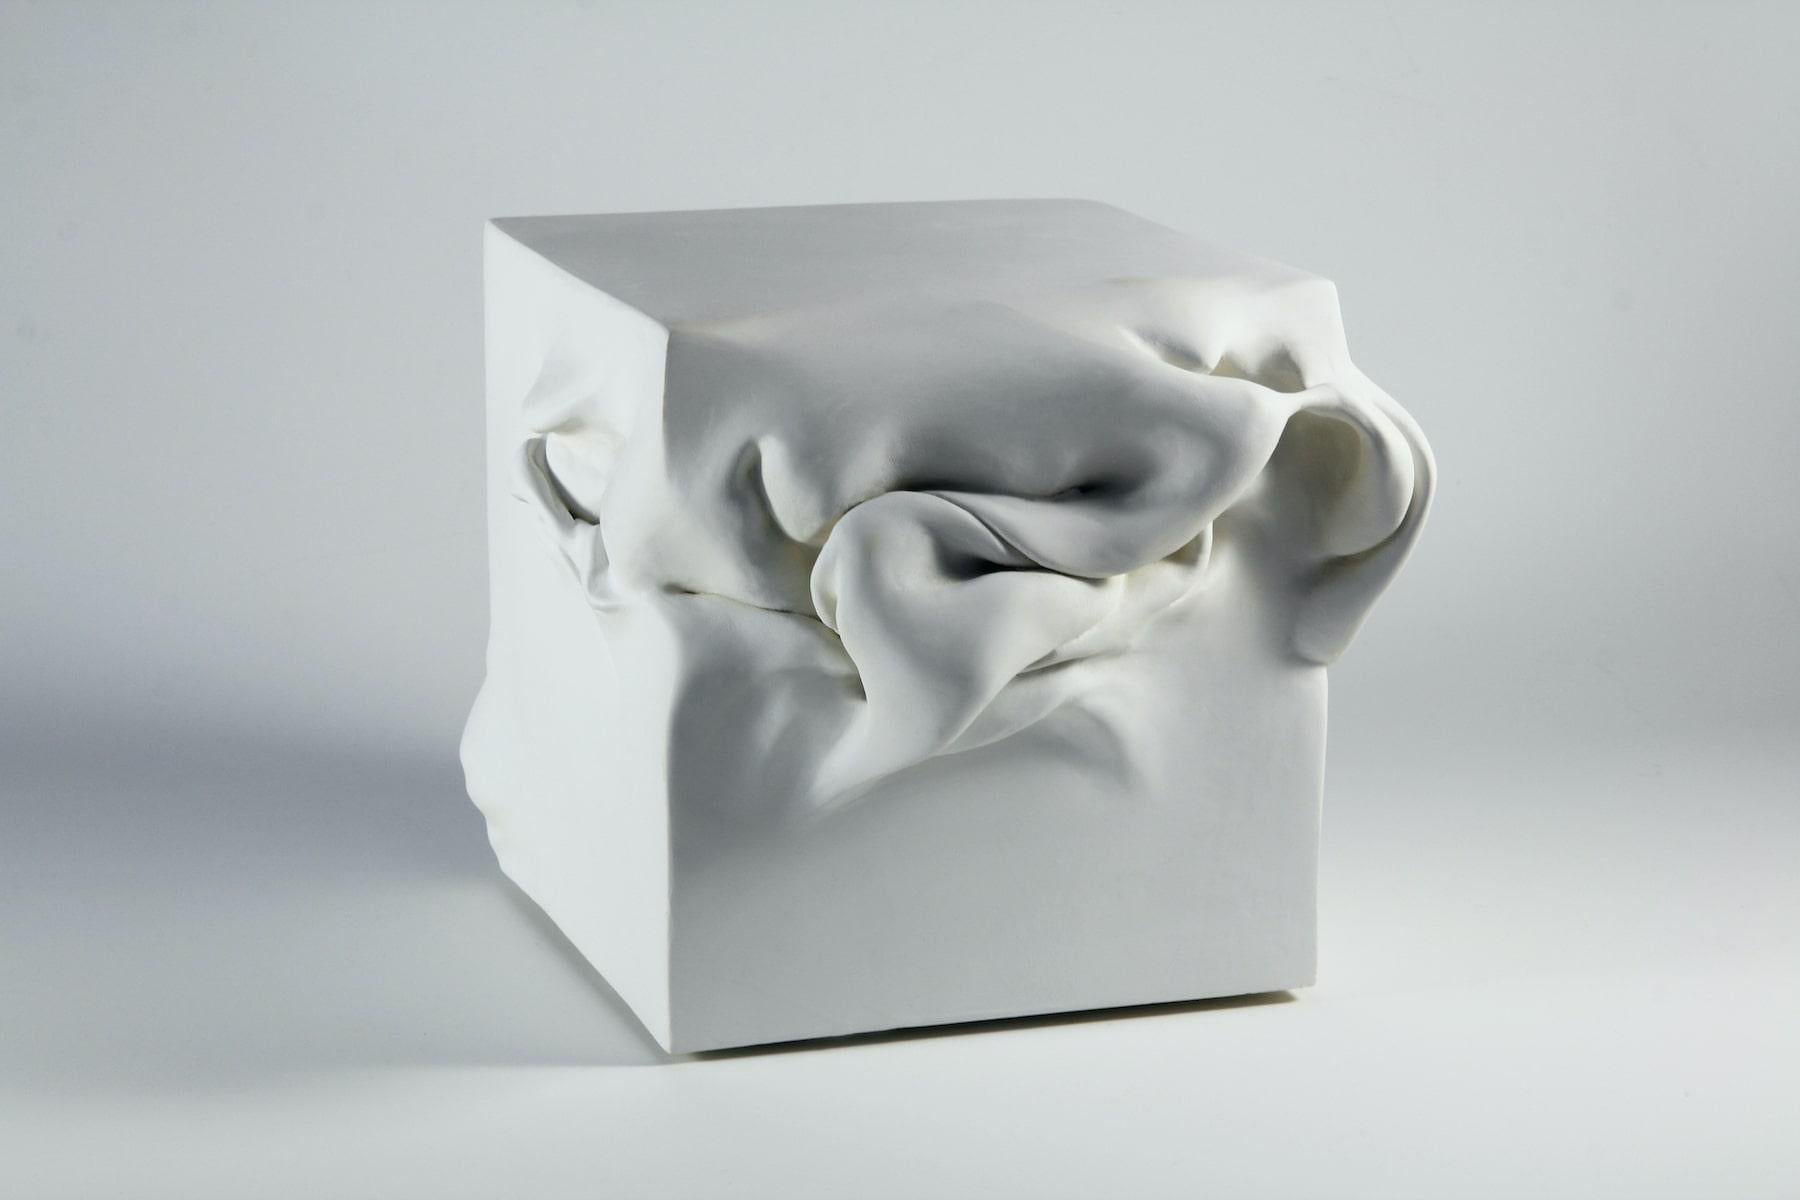 Cube 3 by Sharon Brill - Abstract clay sculpture, white, organic forms, ceramic For Sale 1